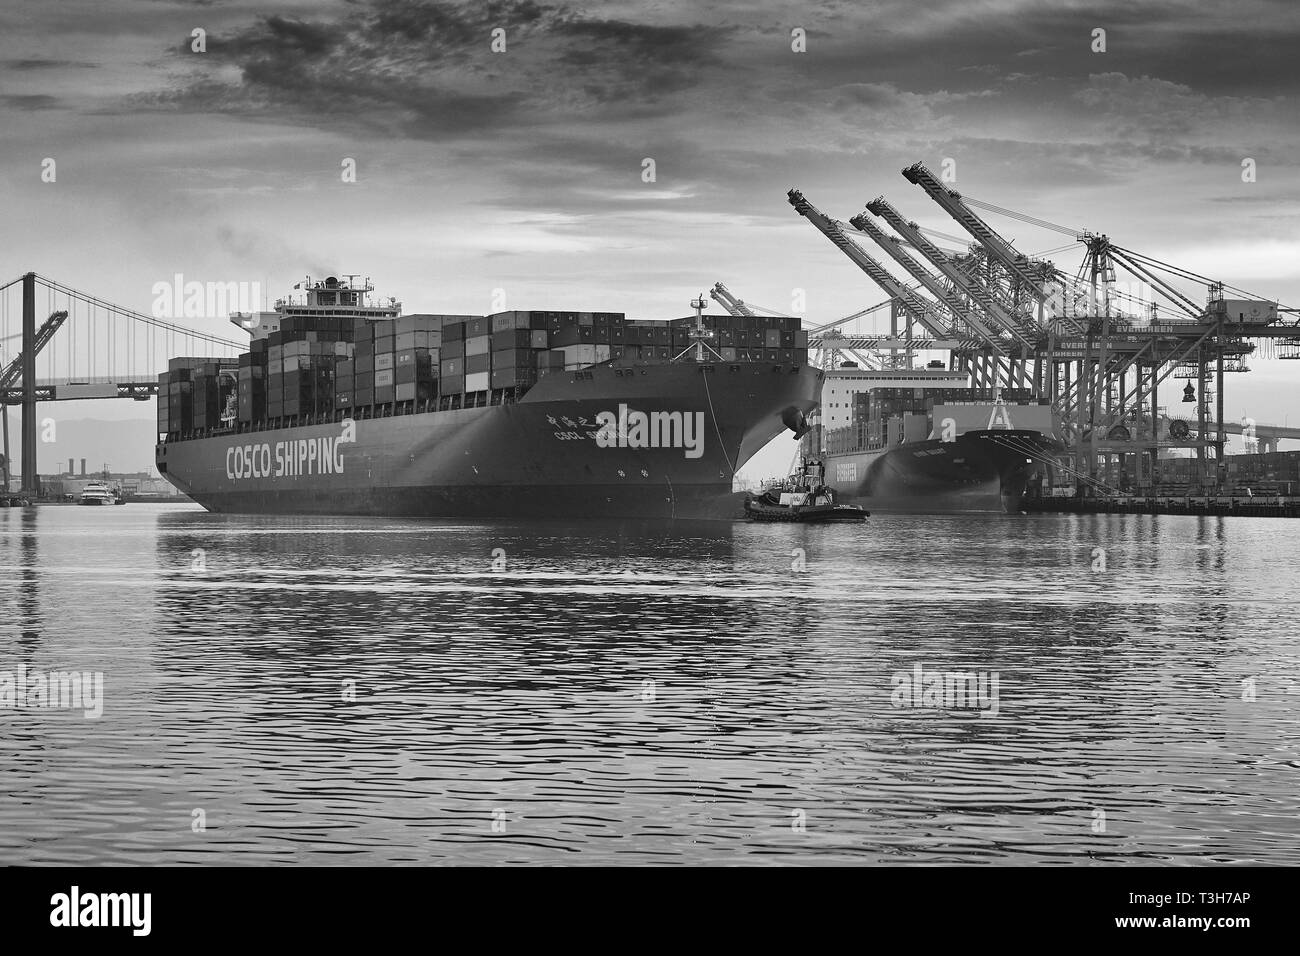 Black And White Photo Of The Departing COSCO SHIPPING, CSCL SPRING-L And The Evergreen Container Ship, EVER SMART-R, In The Port Of Los Angeles, USA Stock Photo